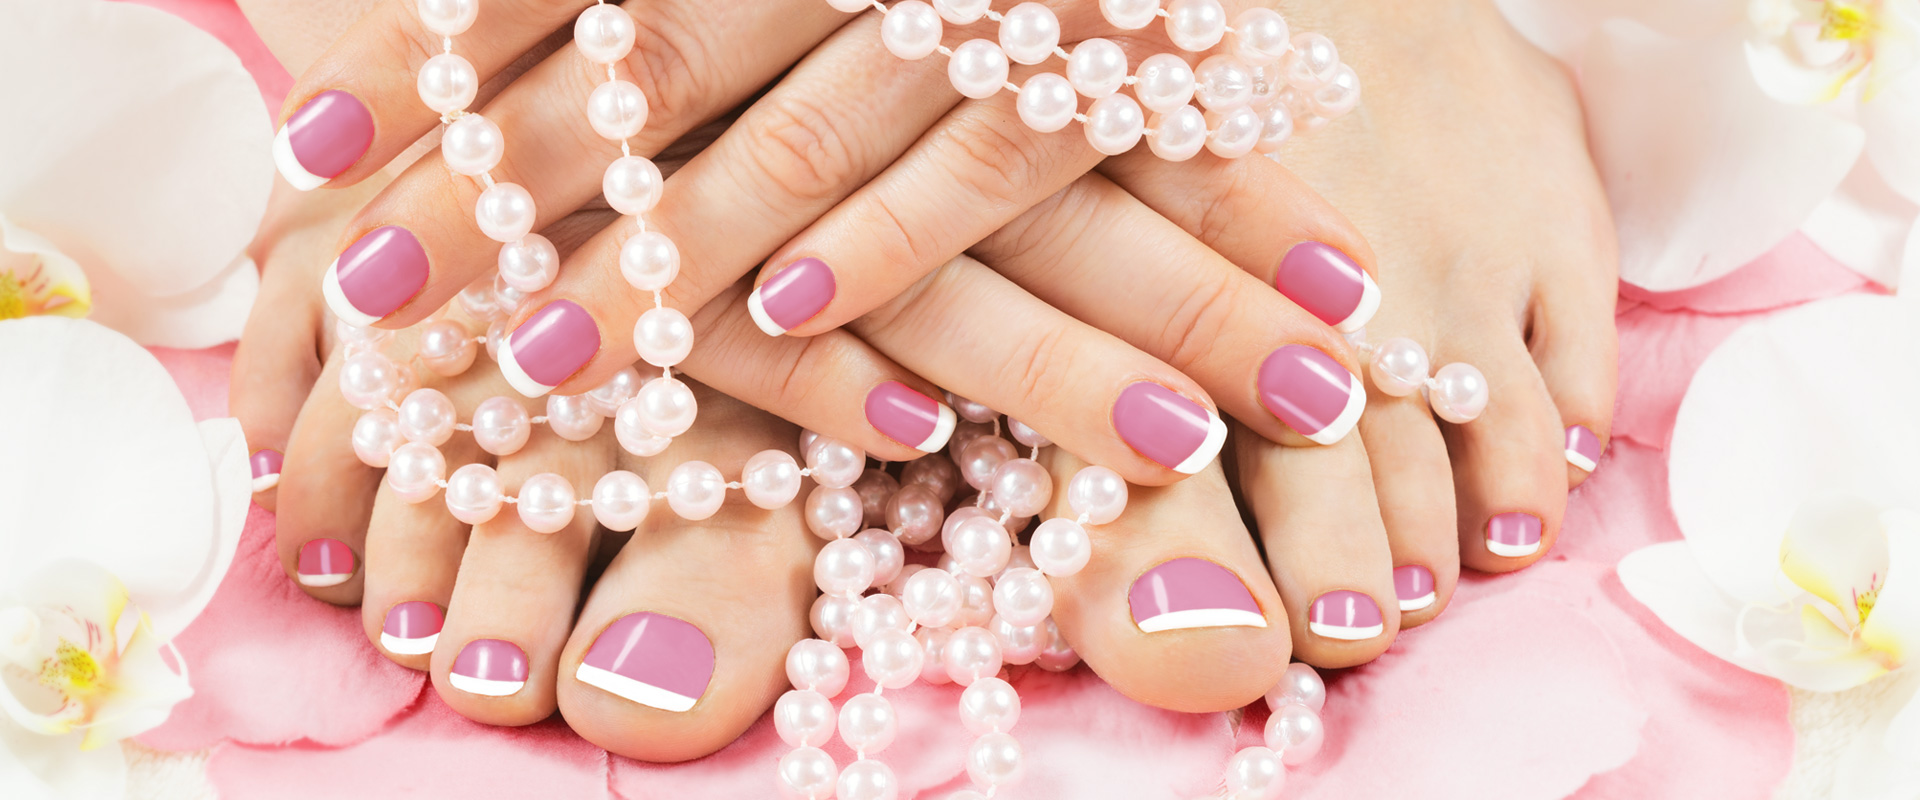 manicure-pedicure-for-her-sisi-nail-spa